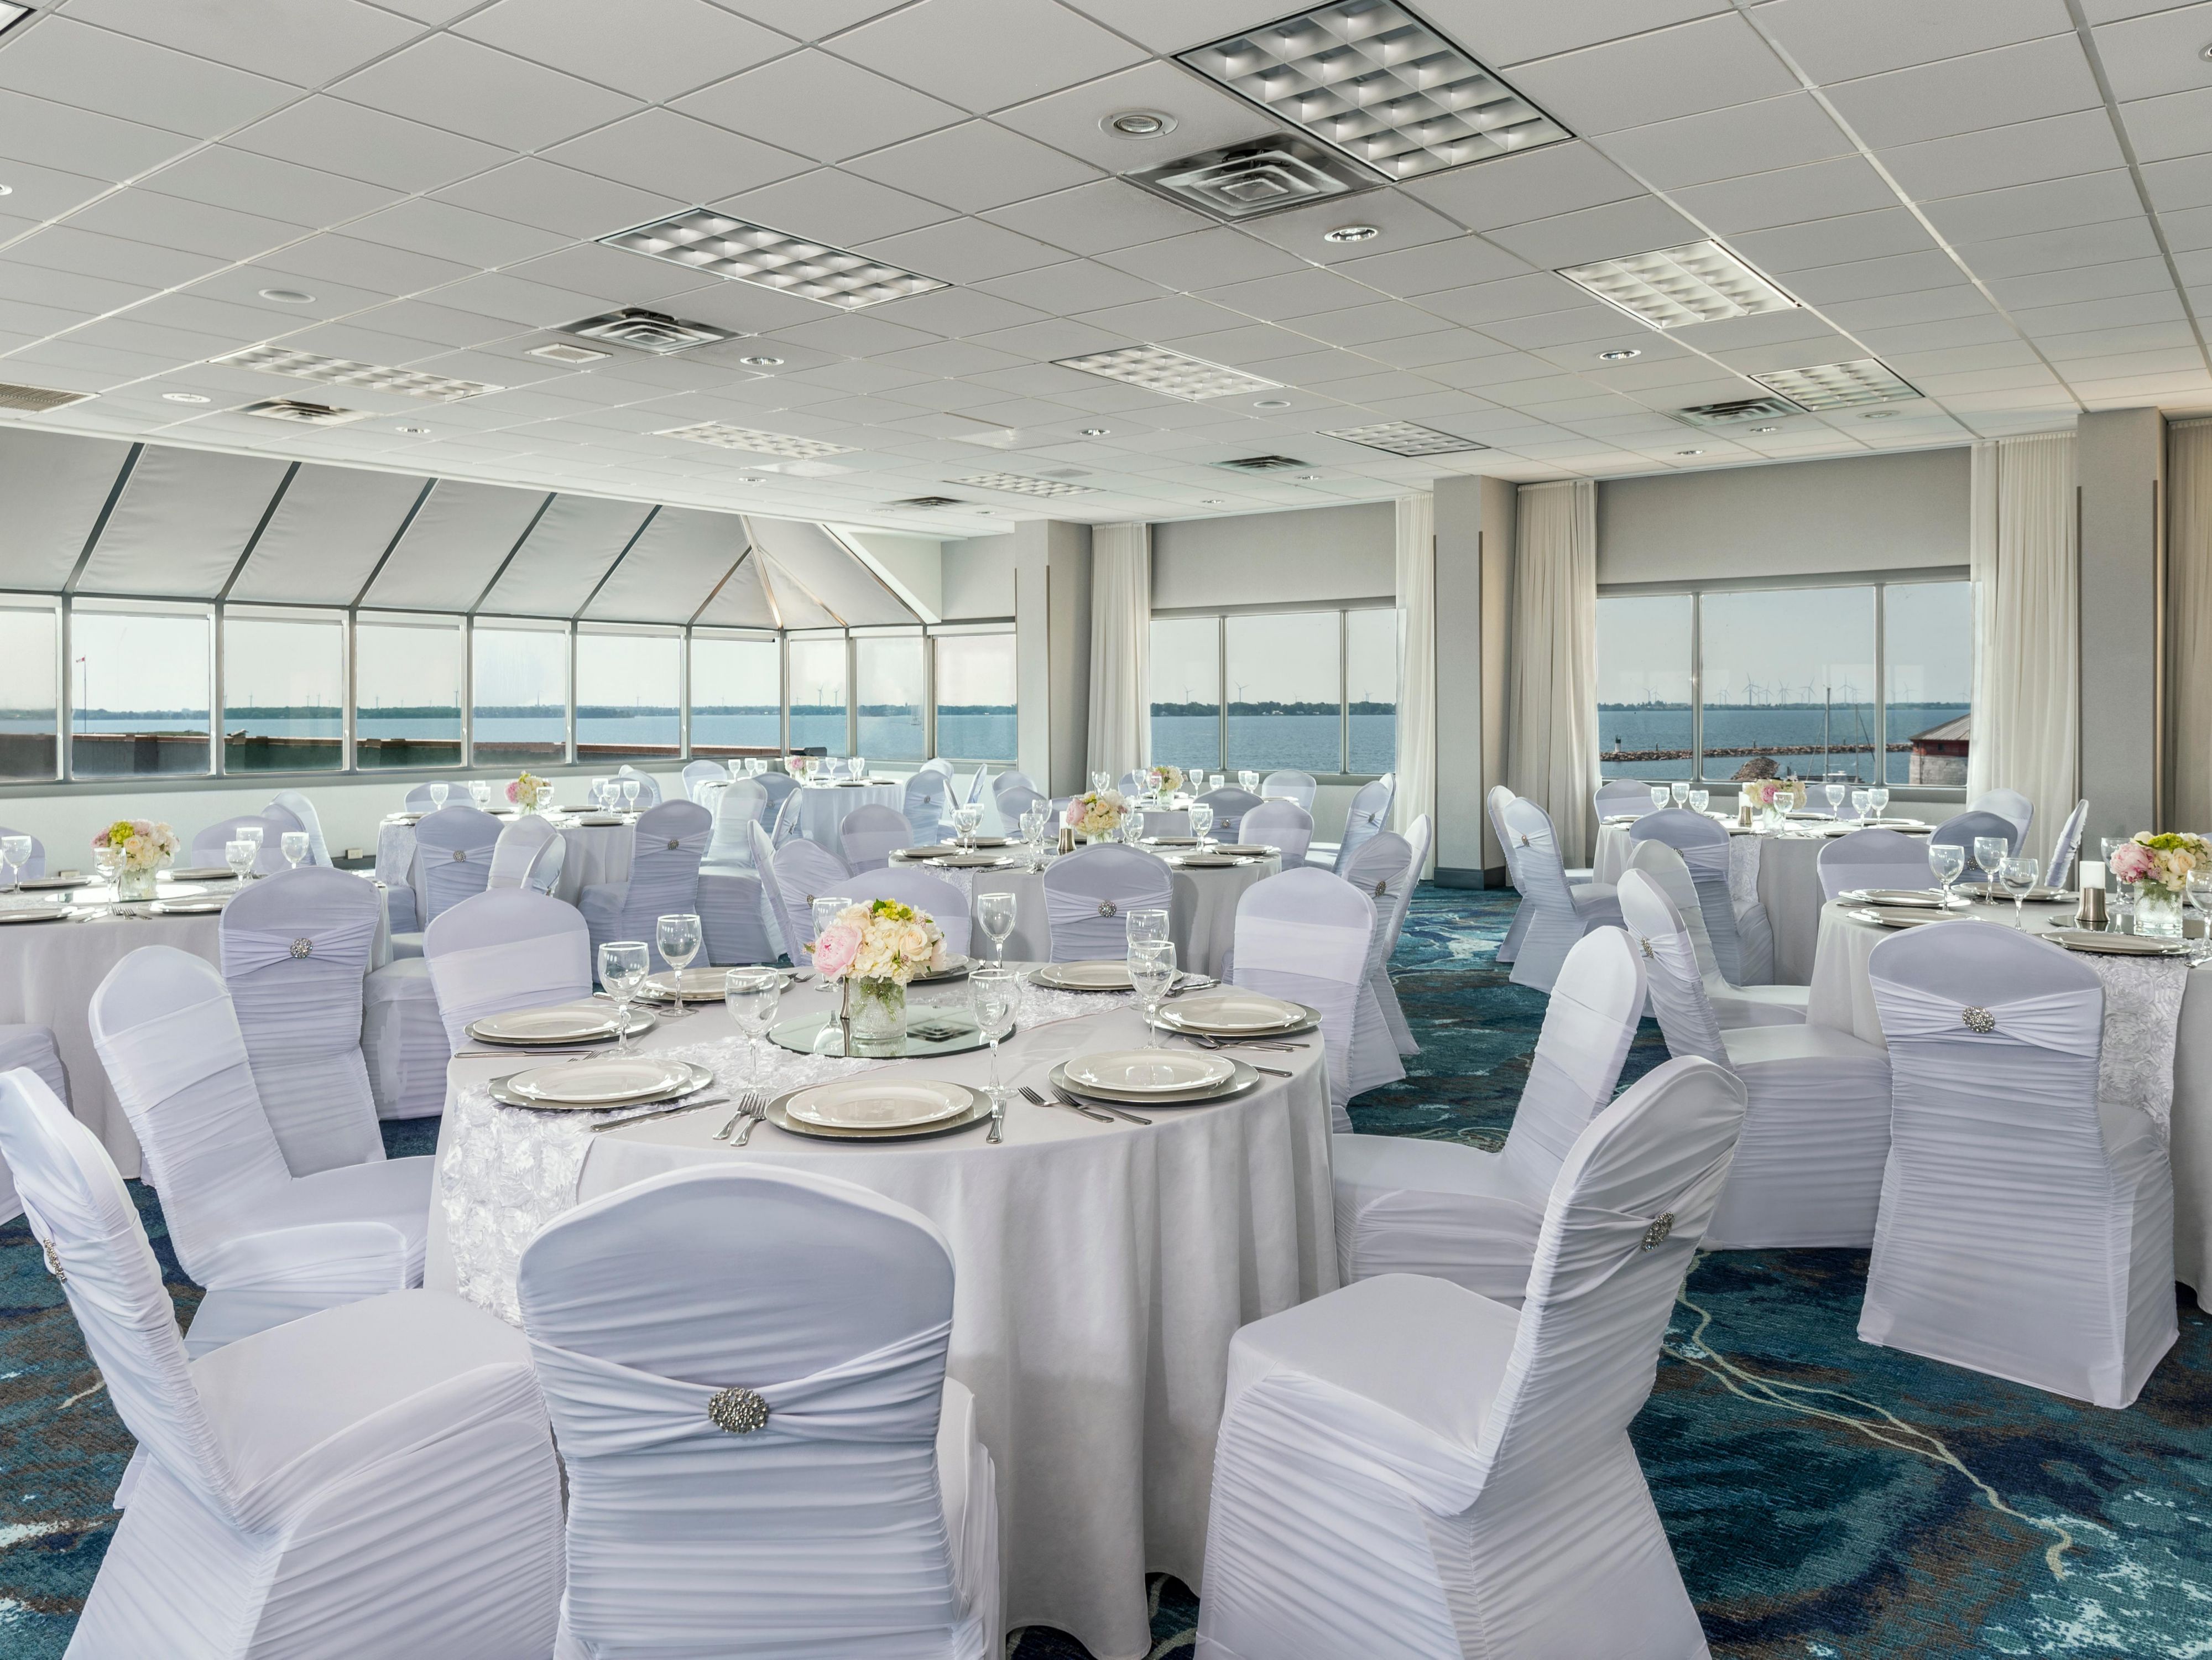 Our newly renovated event space offers stunning waterfront views and natural light. 2 large ballrooms enable you to host your wedding ceremony and dinner onsite. Creatively designed all inclusive packages, rehearsal dinners and brunch menus are available. Contact Melissa Reid 613-549-8400 ex 2604 or email Melissa.Reid@innvesthotels.com. 